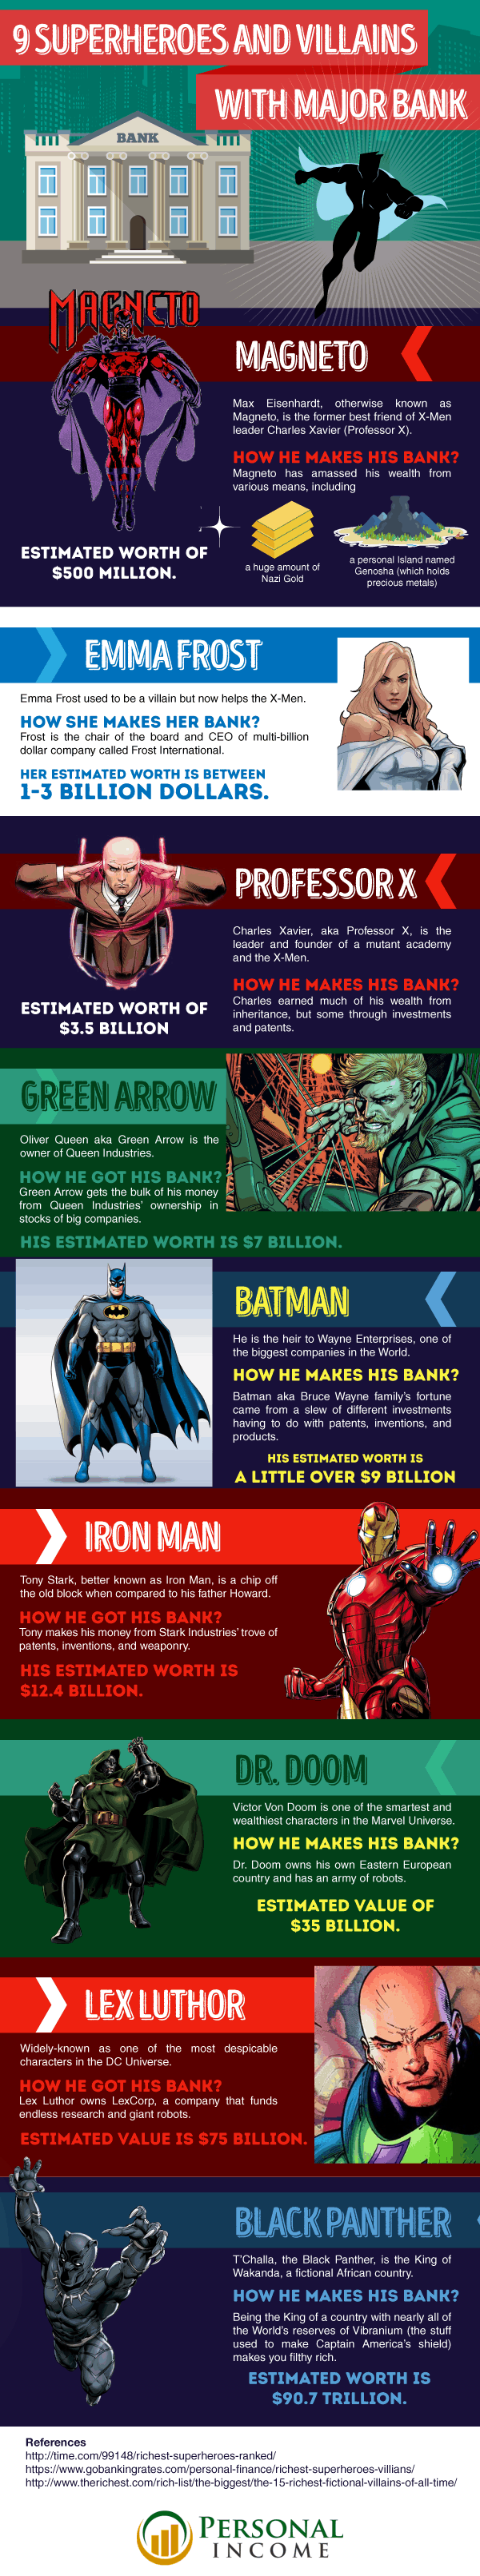 9 Superheroes and Villains With Major Bank